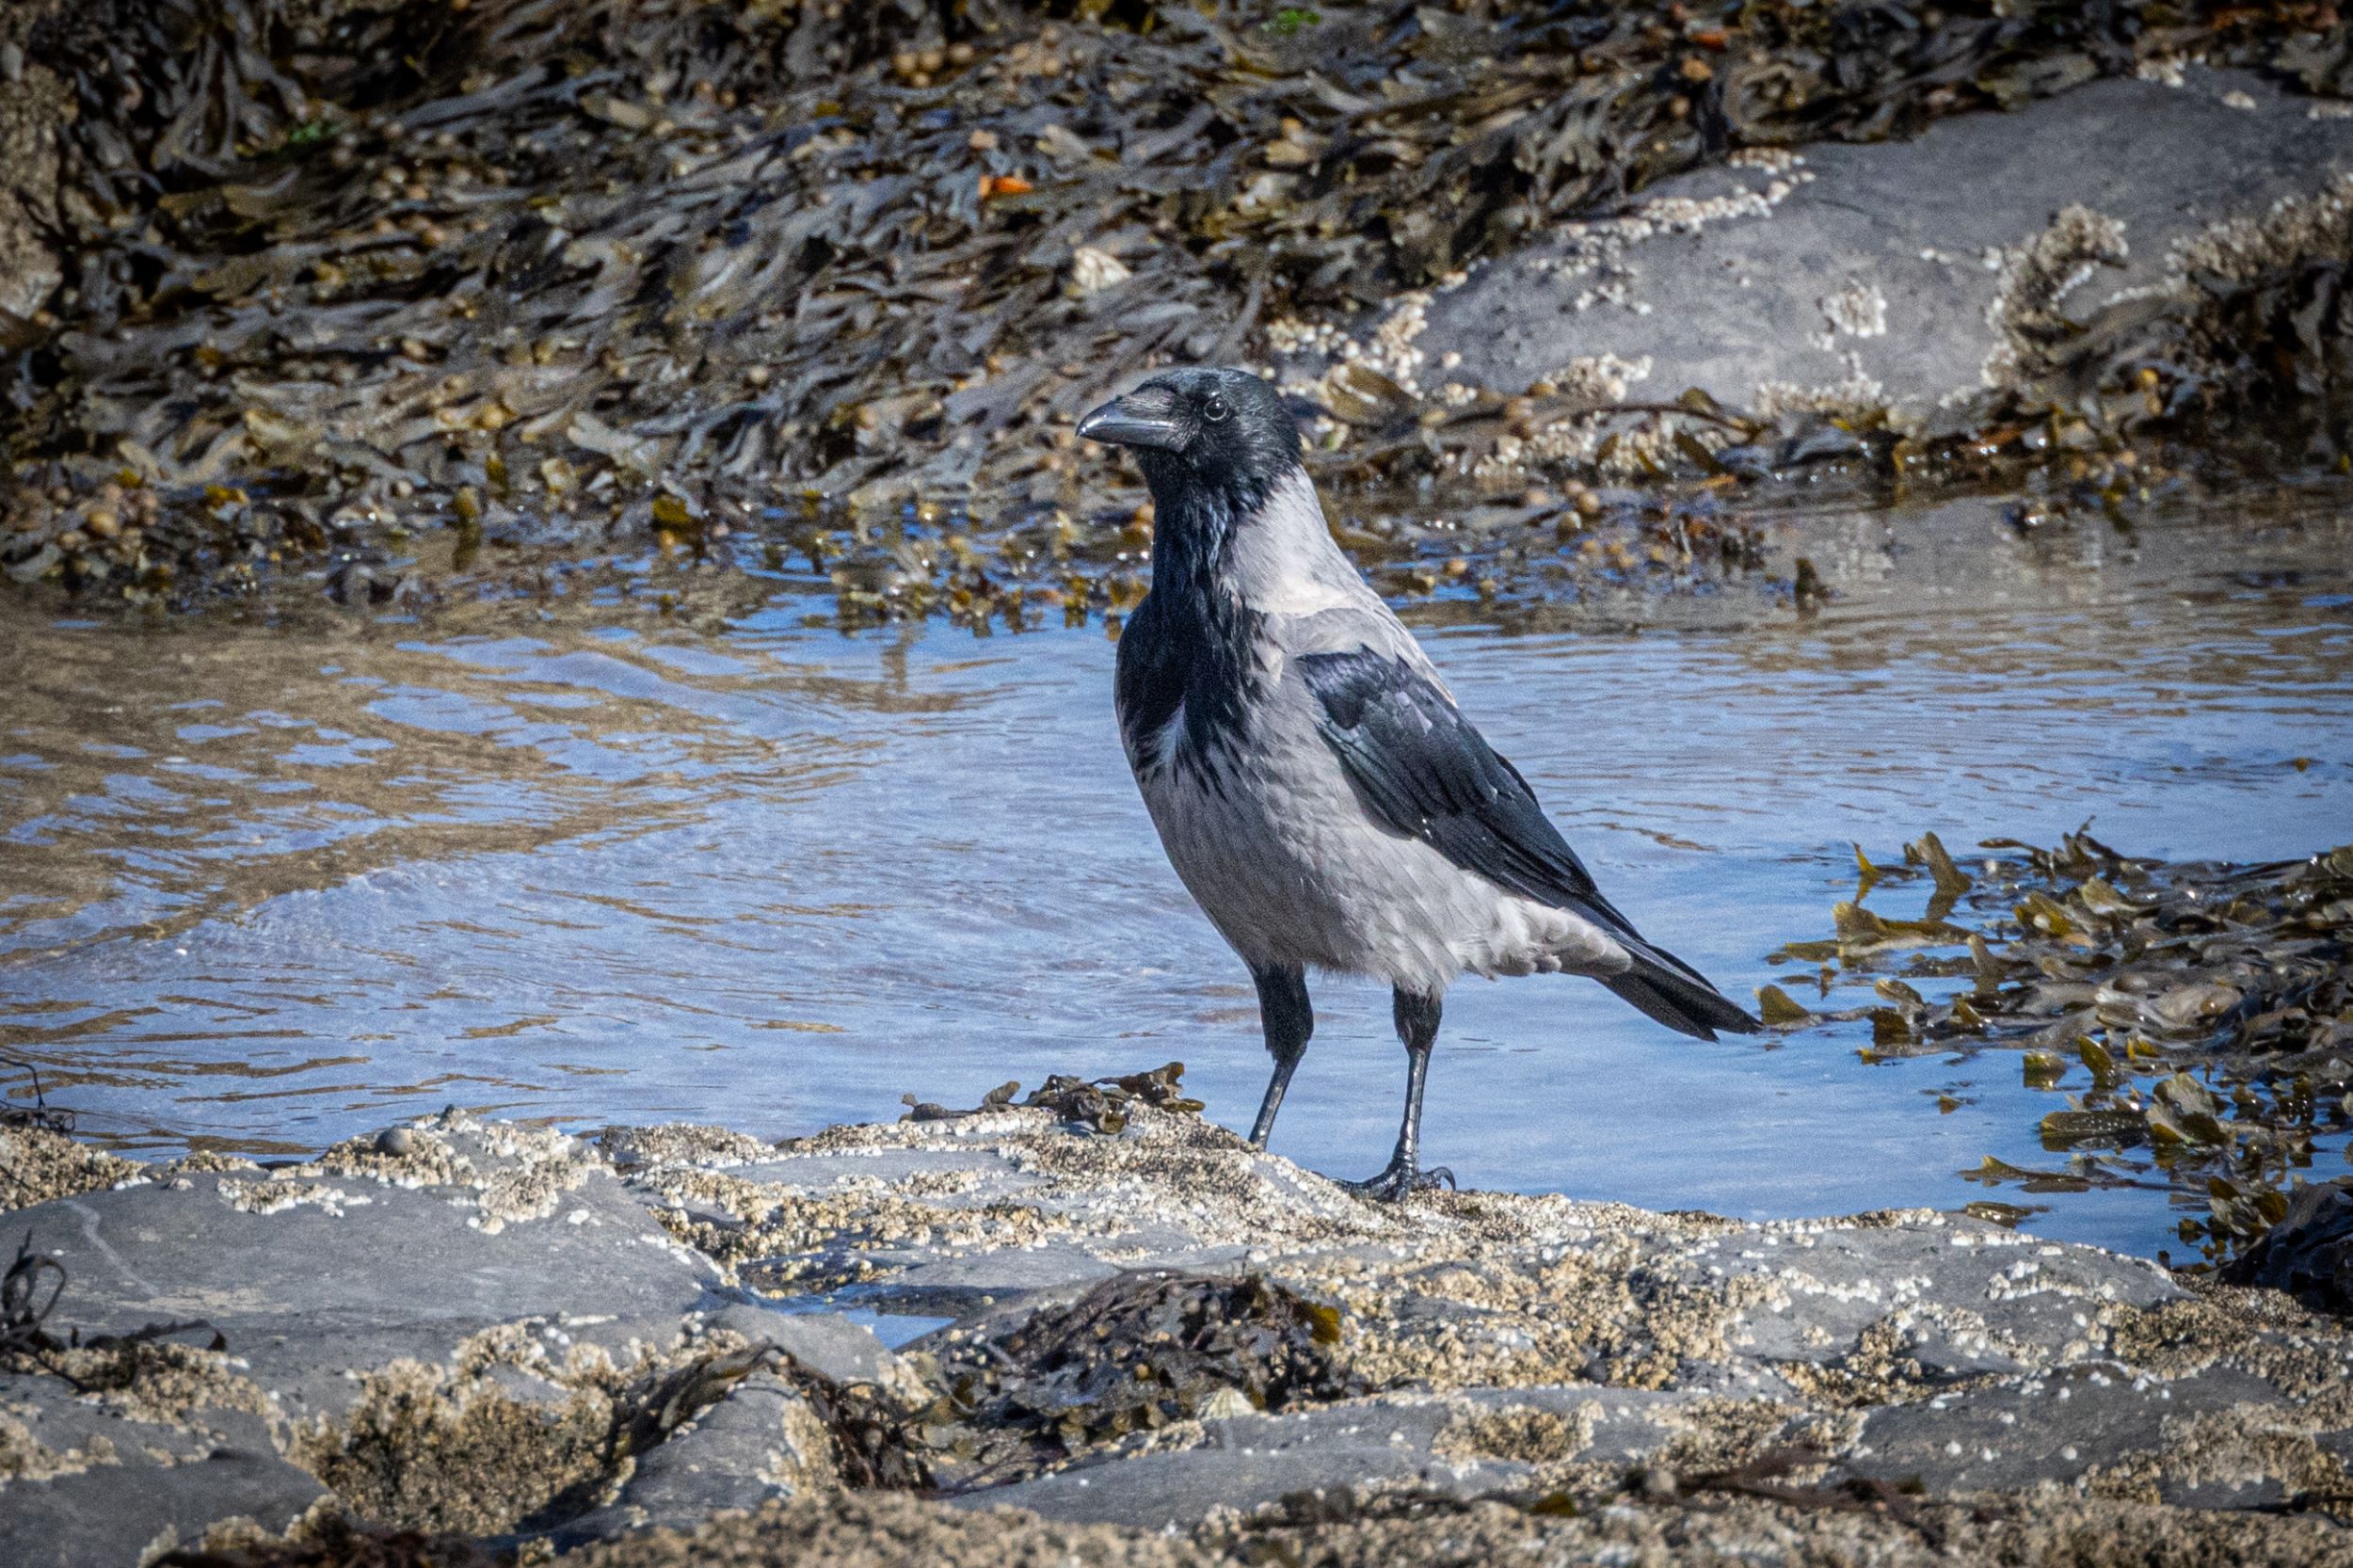 A Hooded Crow on the shoreline